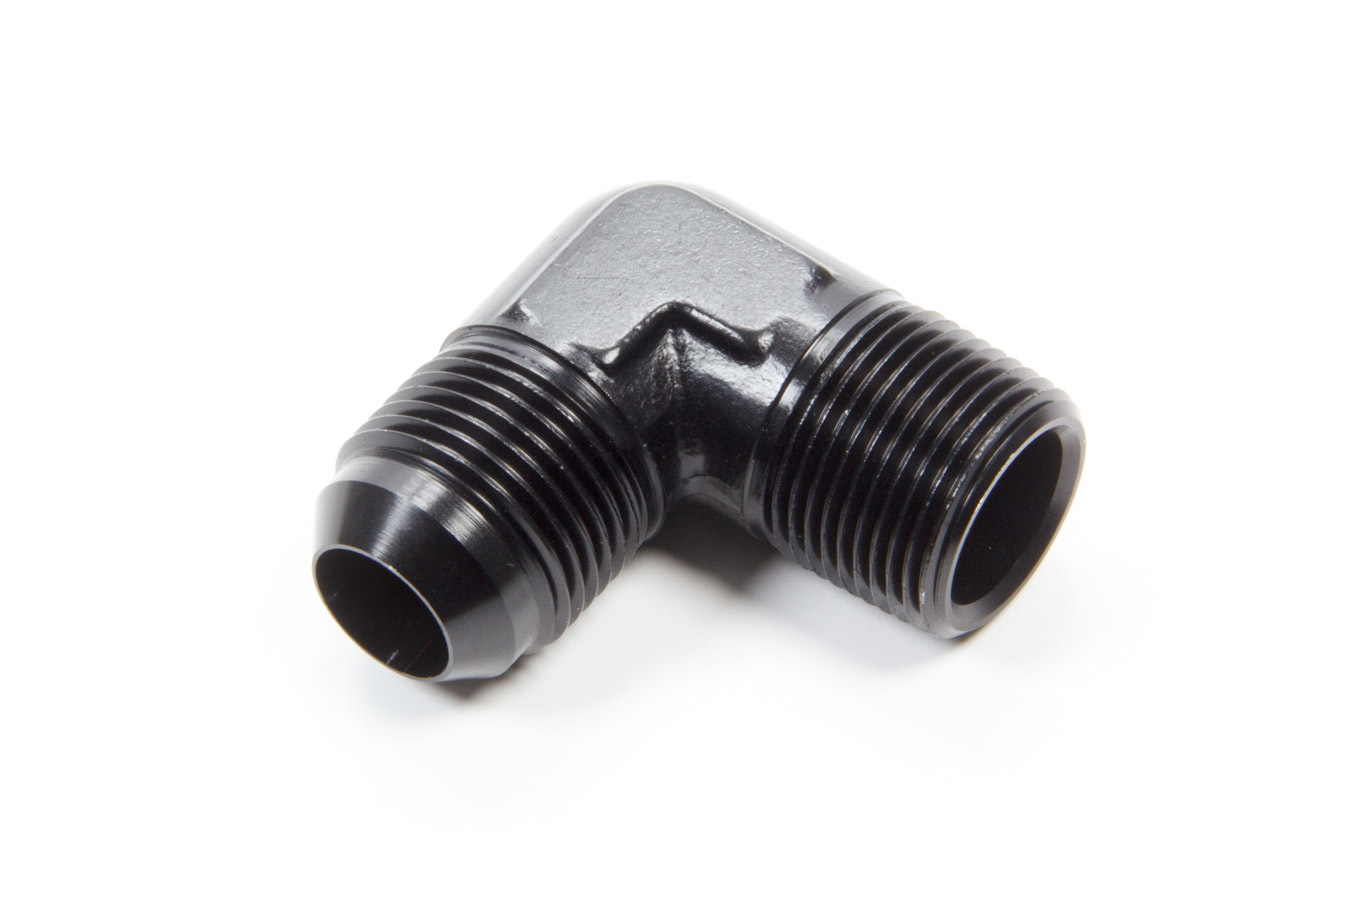 Aeroquip FCM5040 Fitting, Adapter, 90 Degree, 12 AN Male to 3/4 in NPT Male, Aluminum, Black Anodized, Each